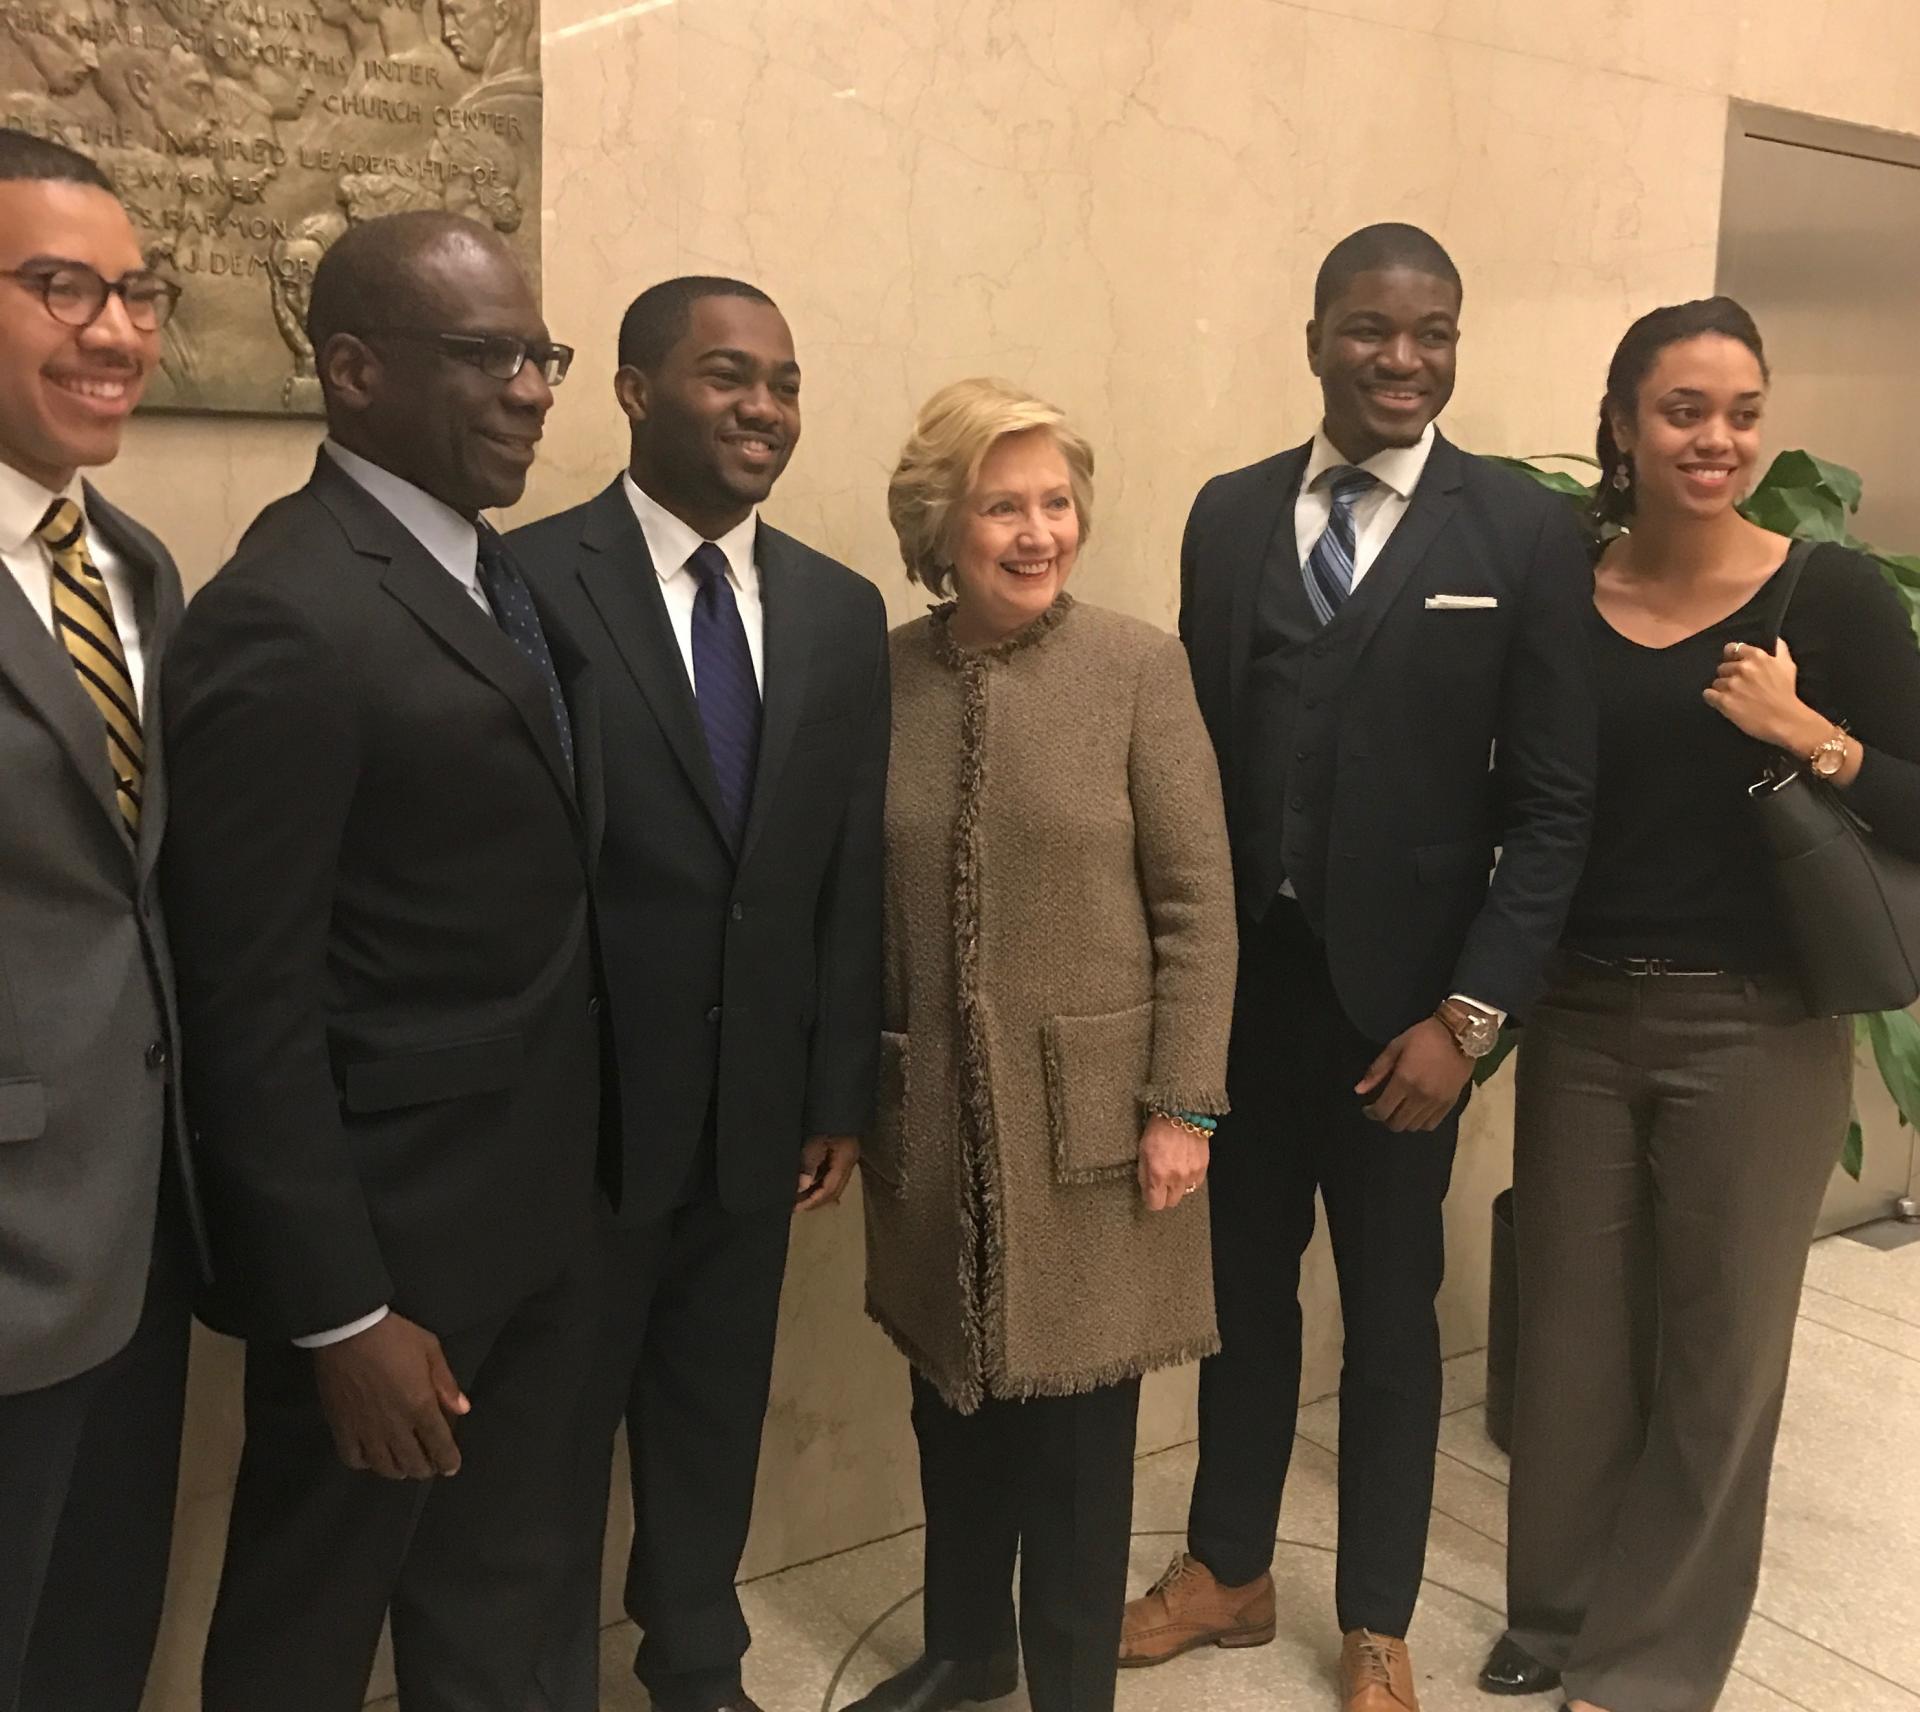 Students with Hillary Clinton